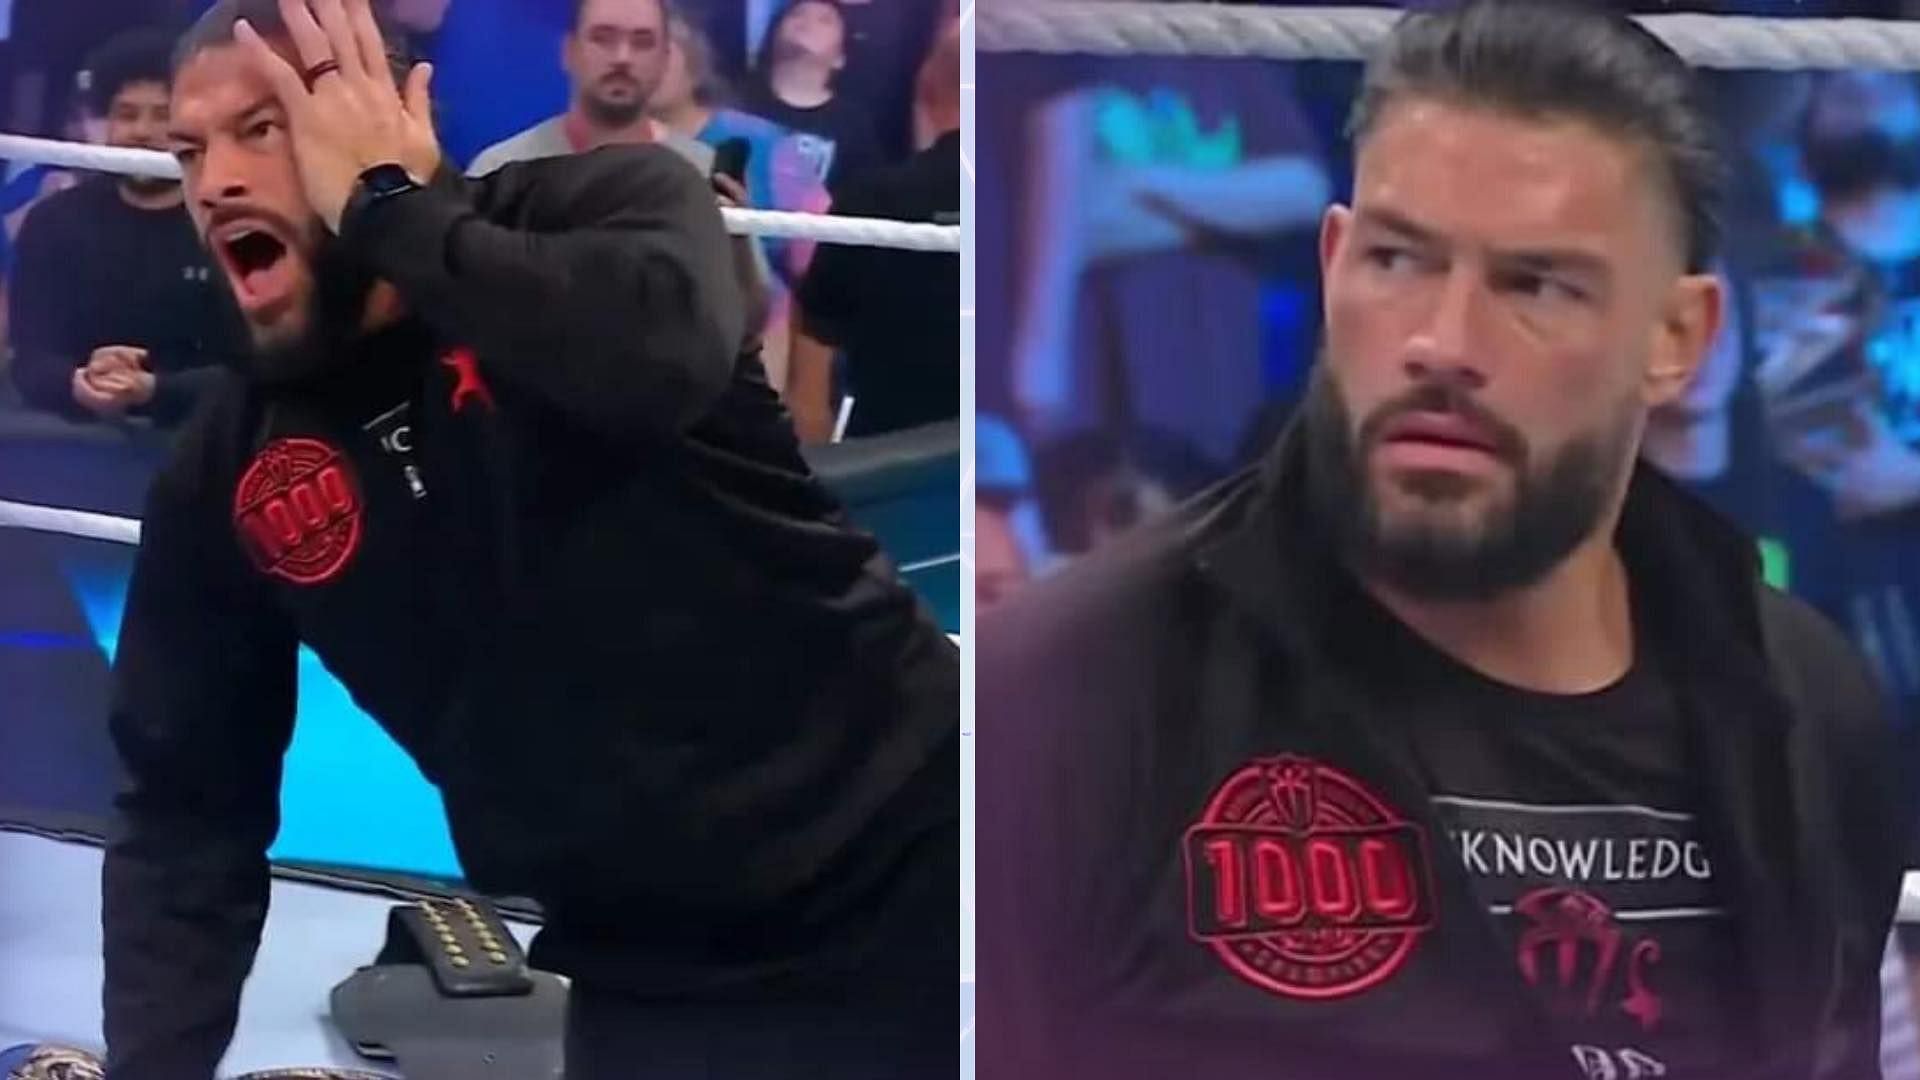 Roman Reigns is 1027+ days champion in WWE.